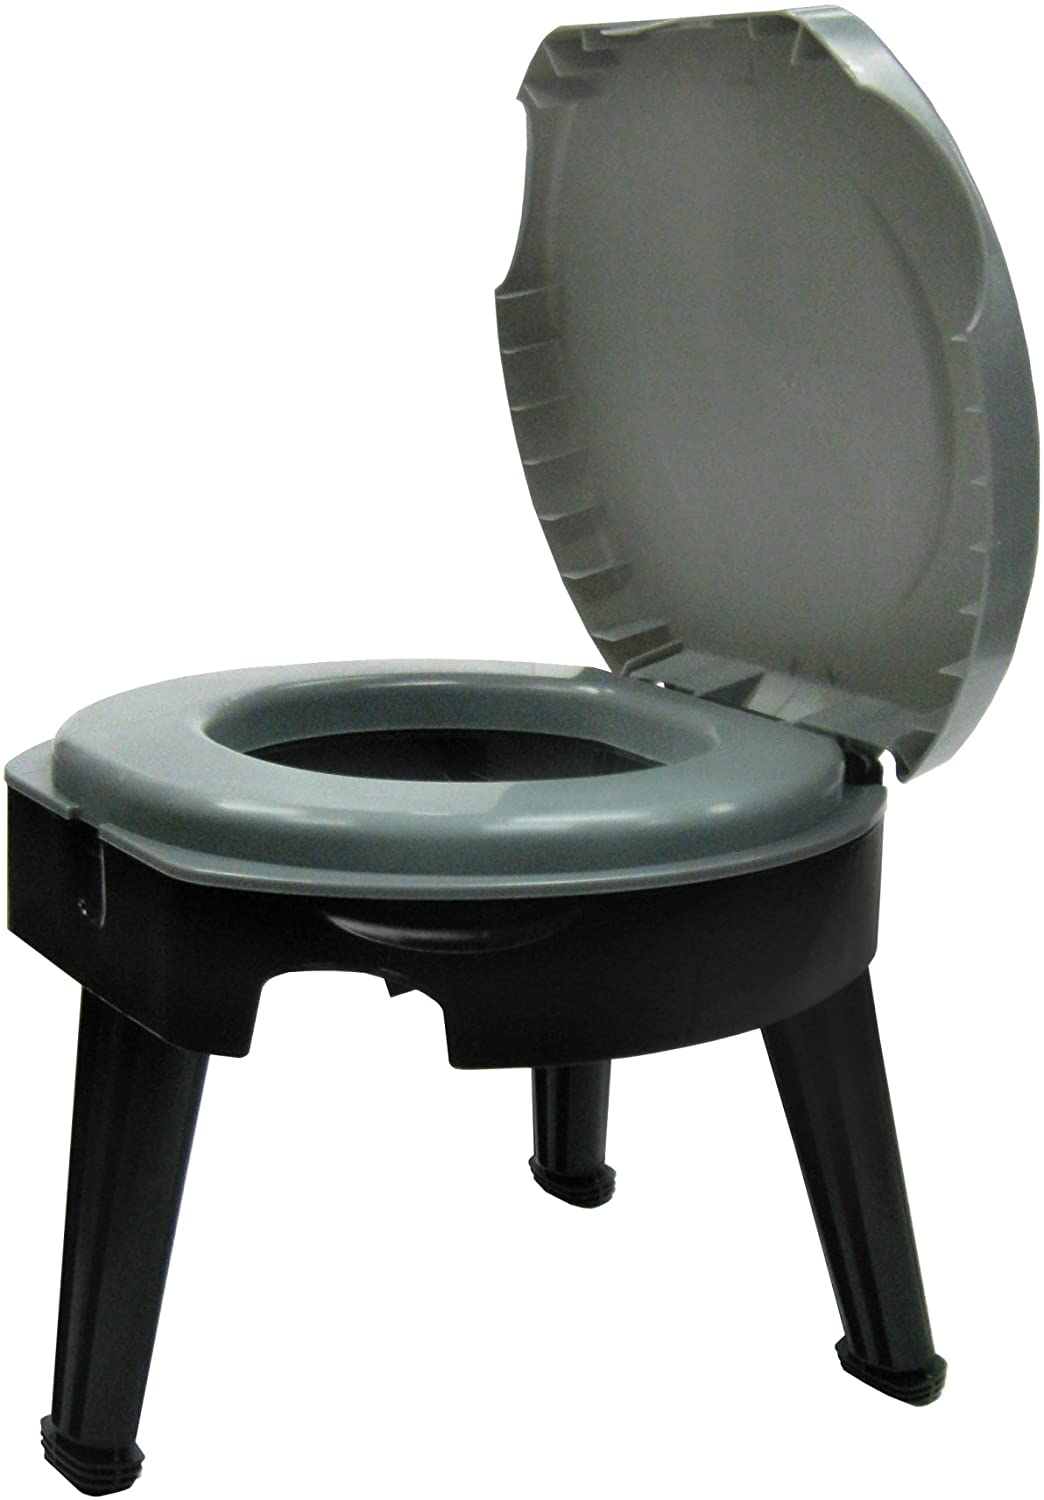 Portable Toilet for Camping